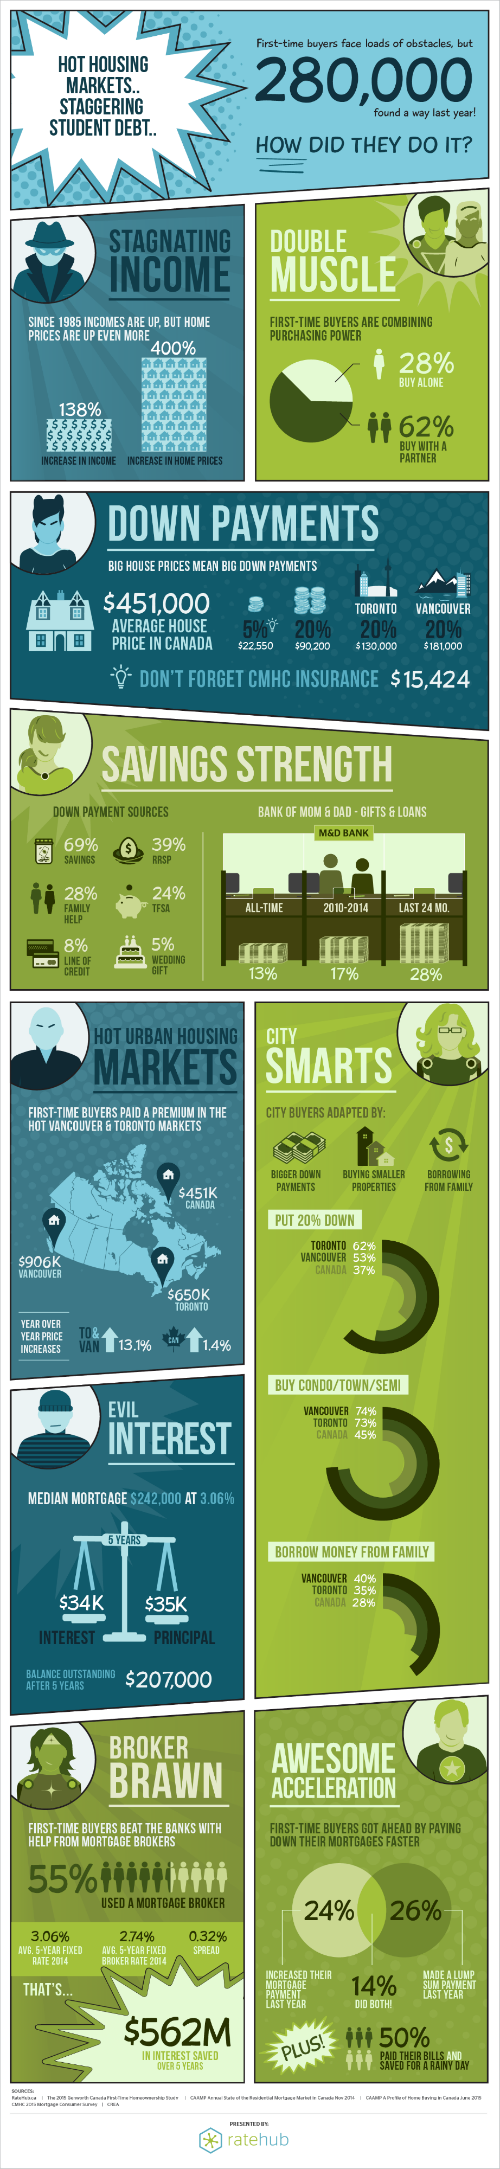 infographic-secret-strengths-of-first-time-homebuyers